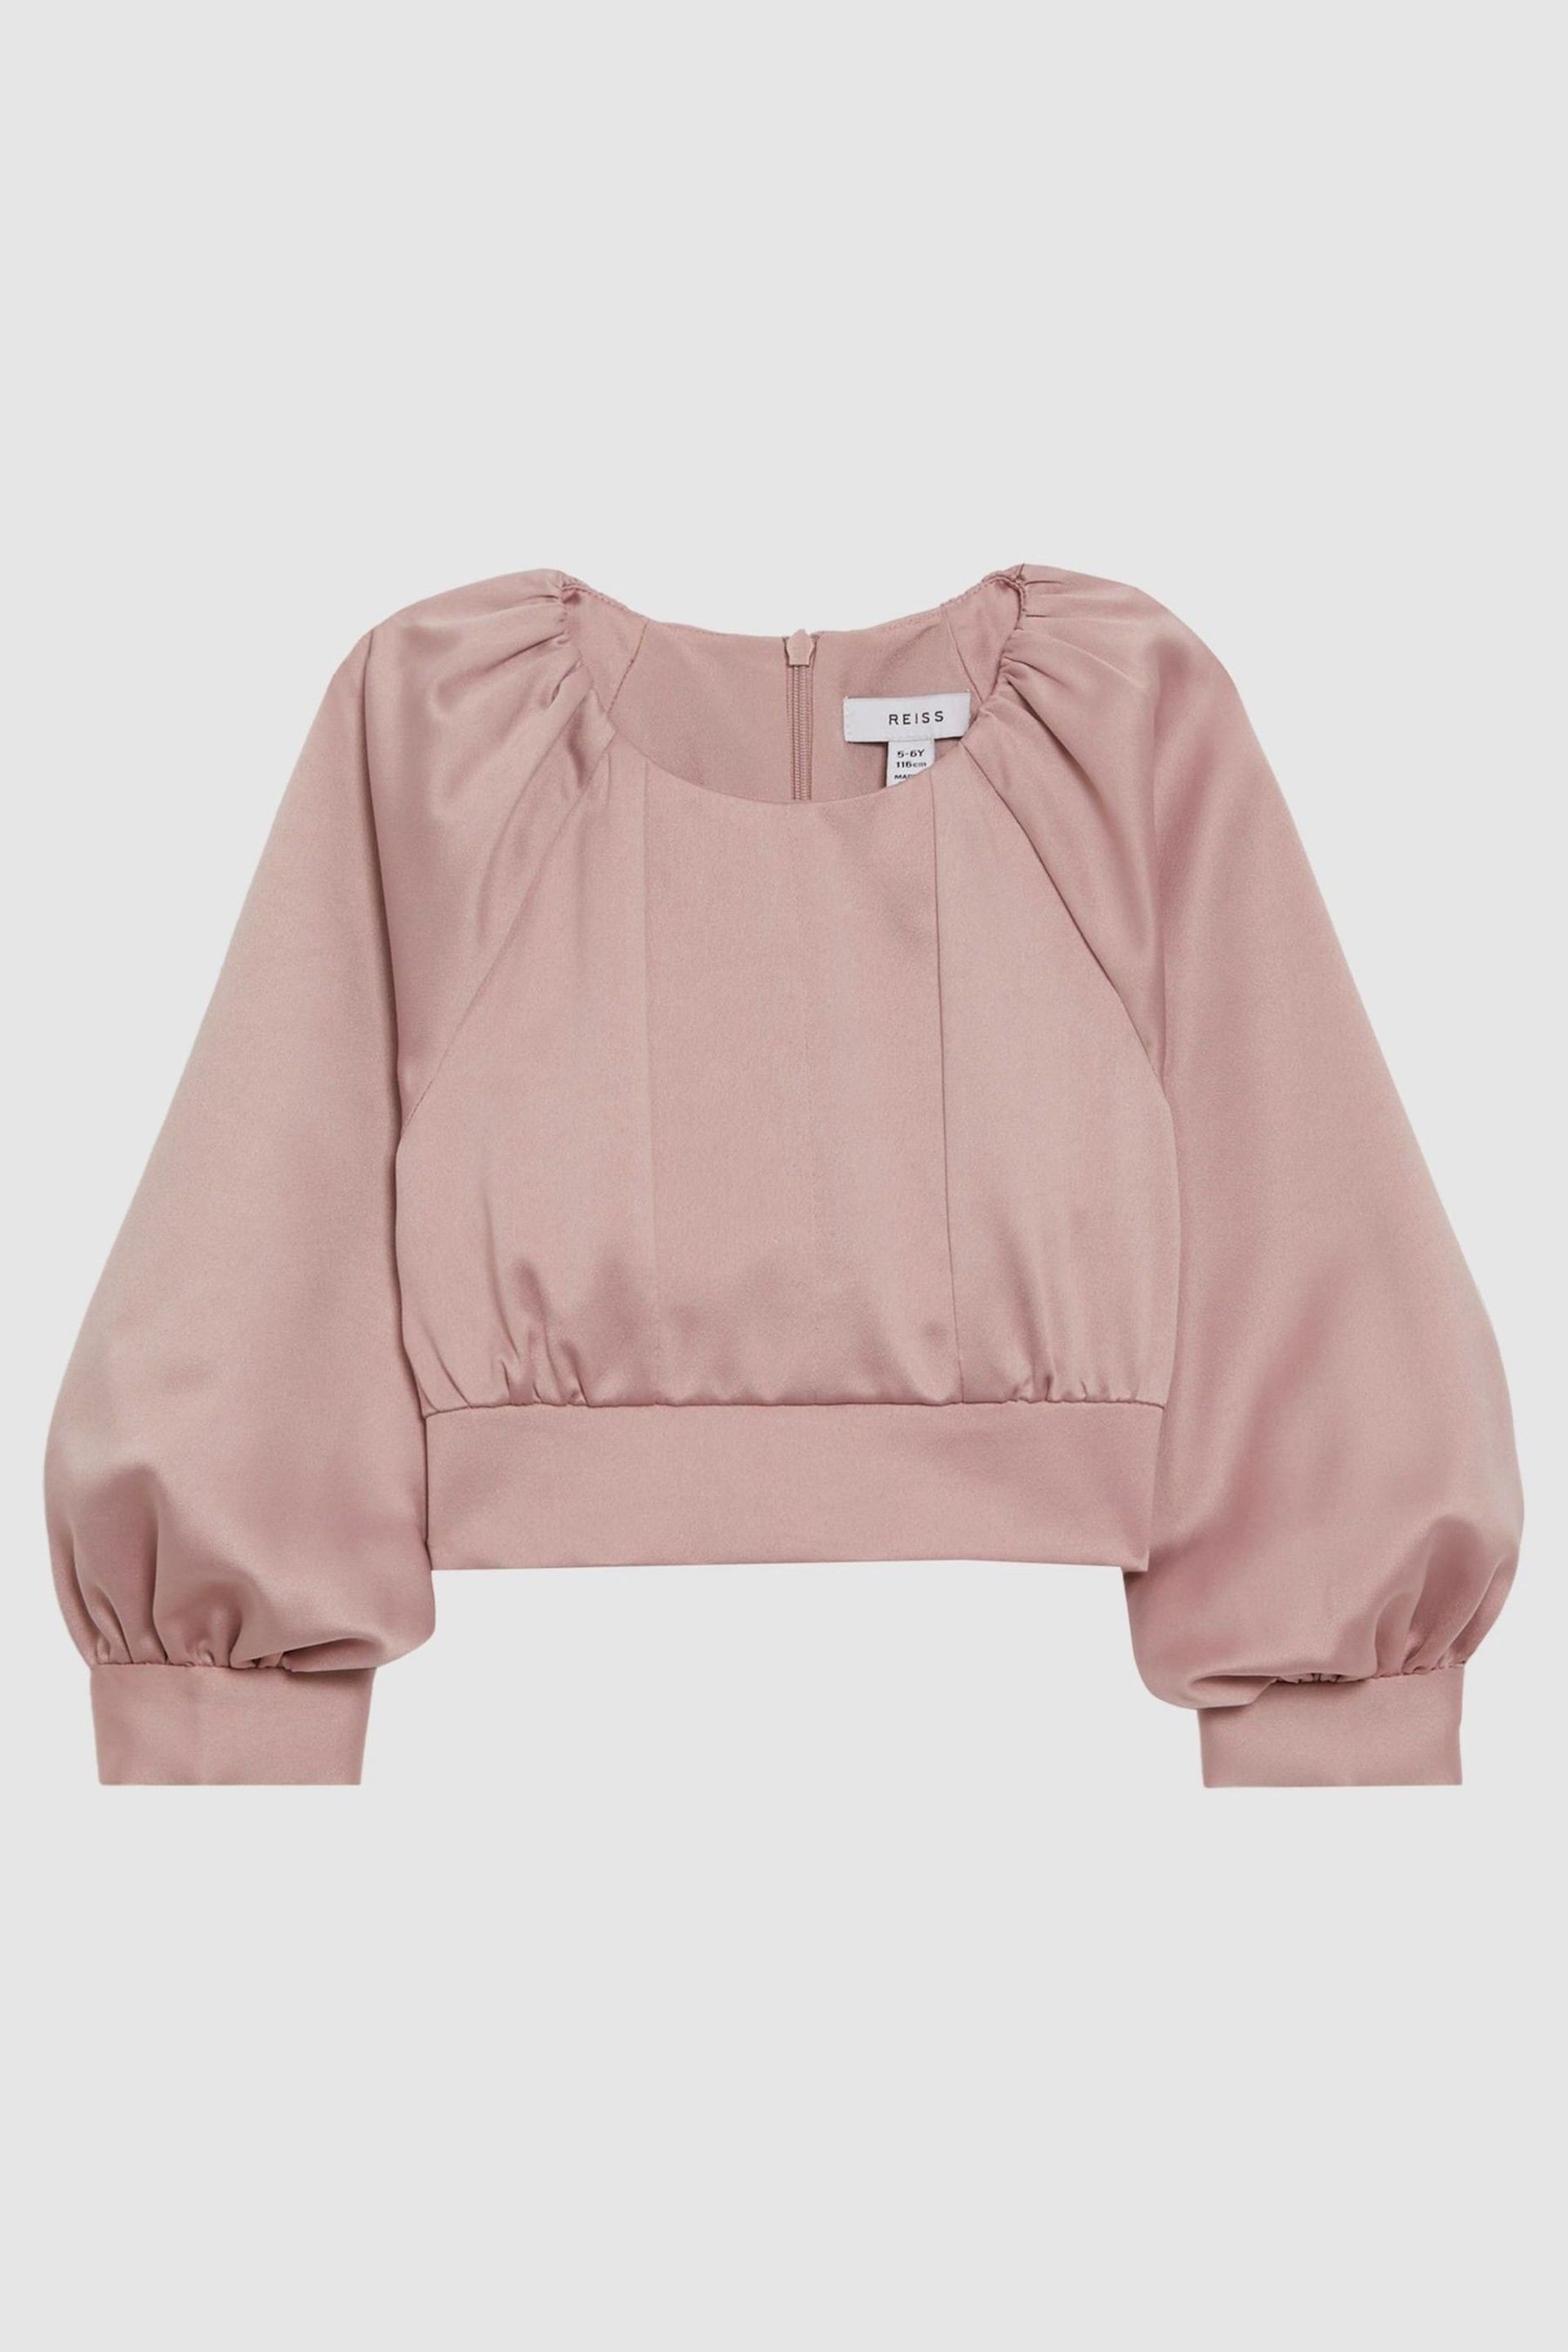 Reiss Pink Molly Junior Cropped Pleated Blouse - Image 2 of 6